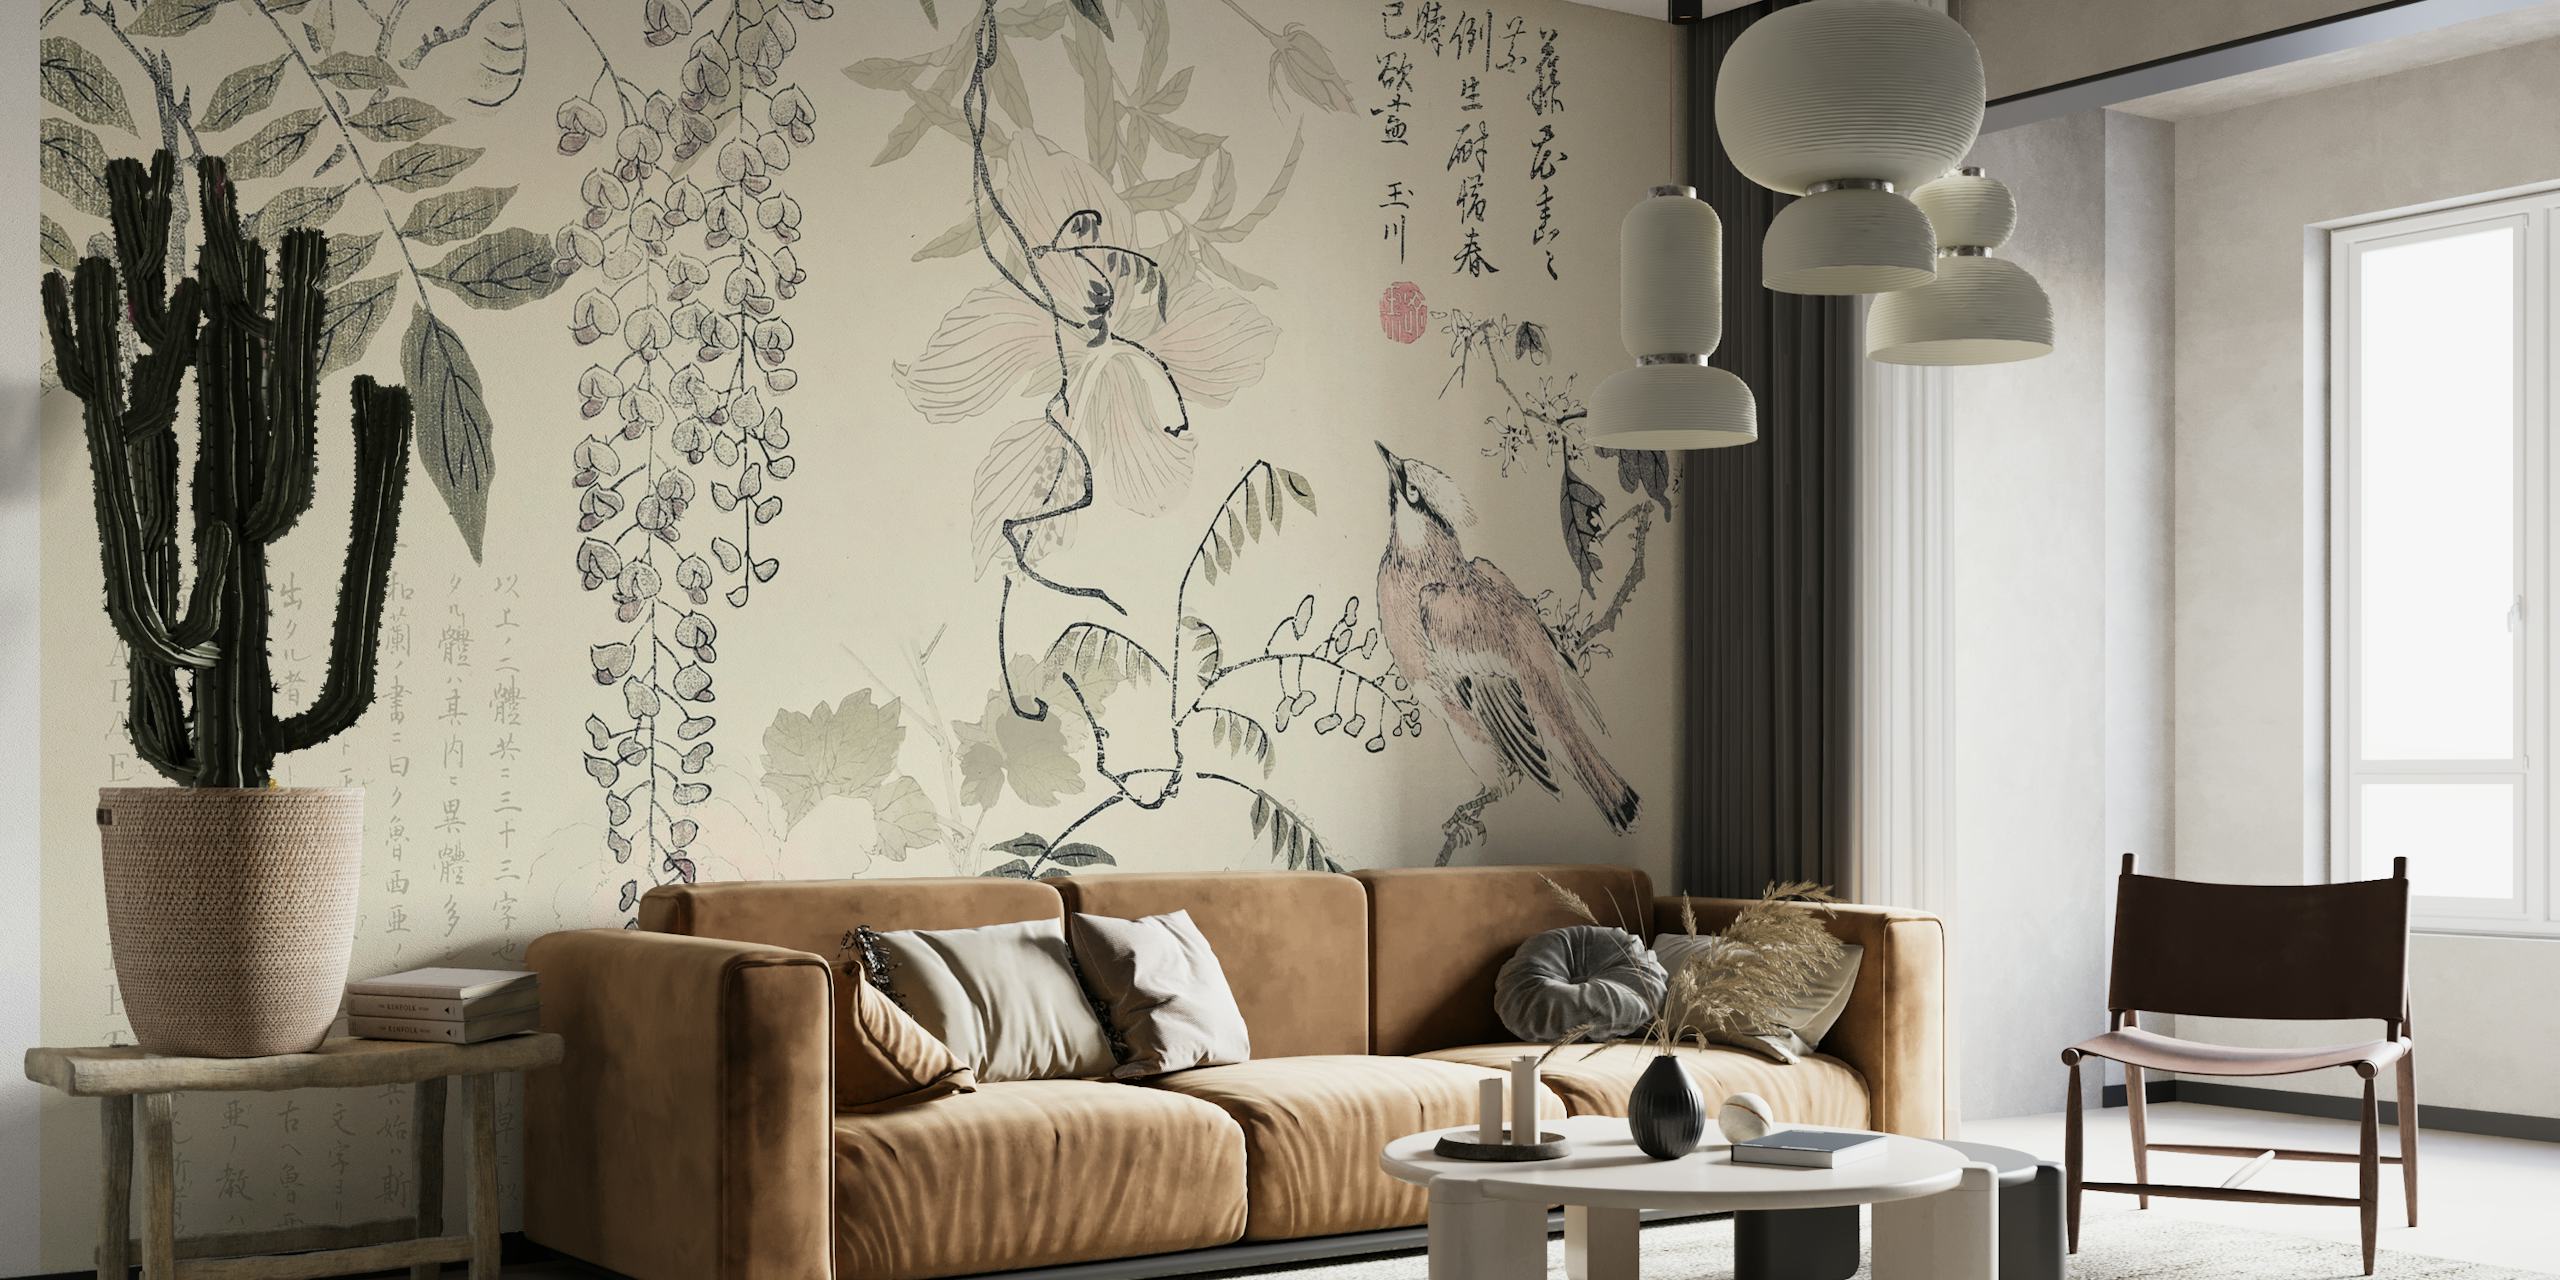 Wisteria Bird Chinoiserie wall mural with birds and flowers on a neutral background